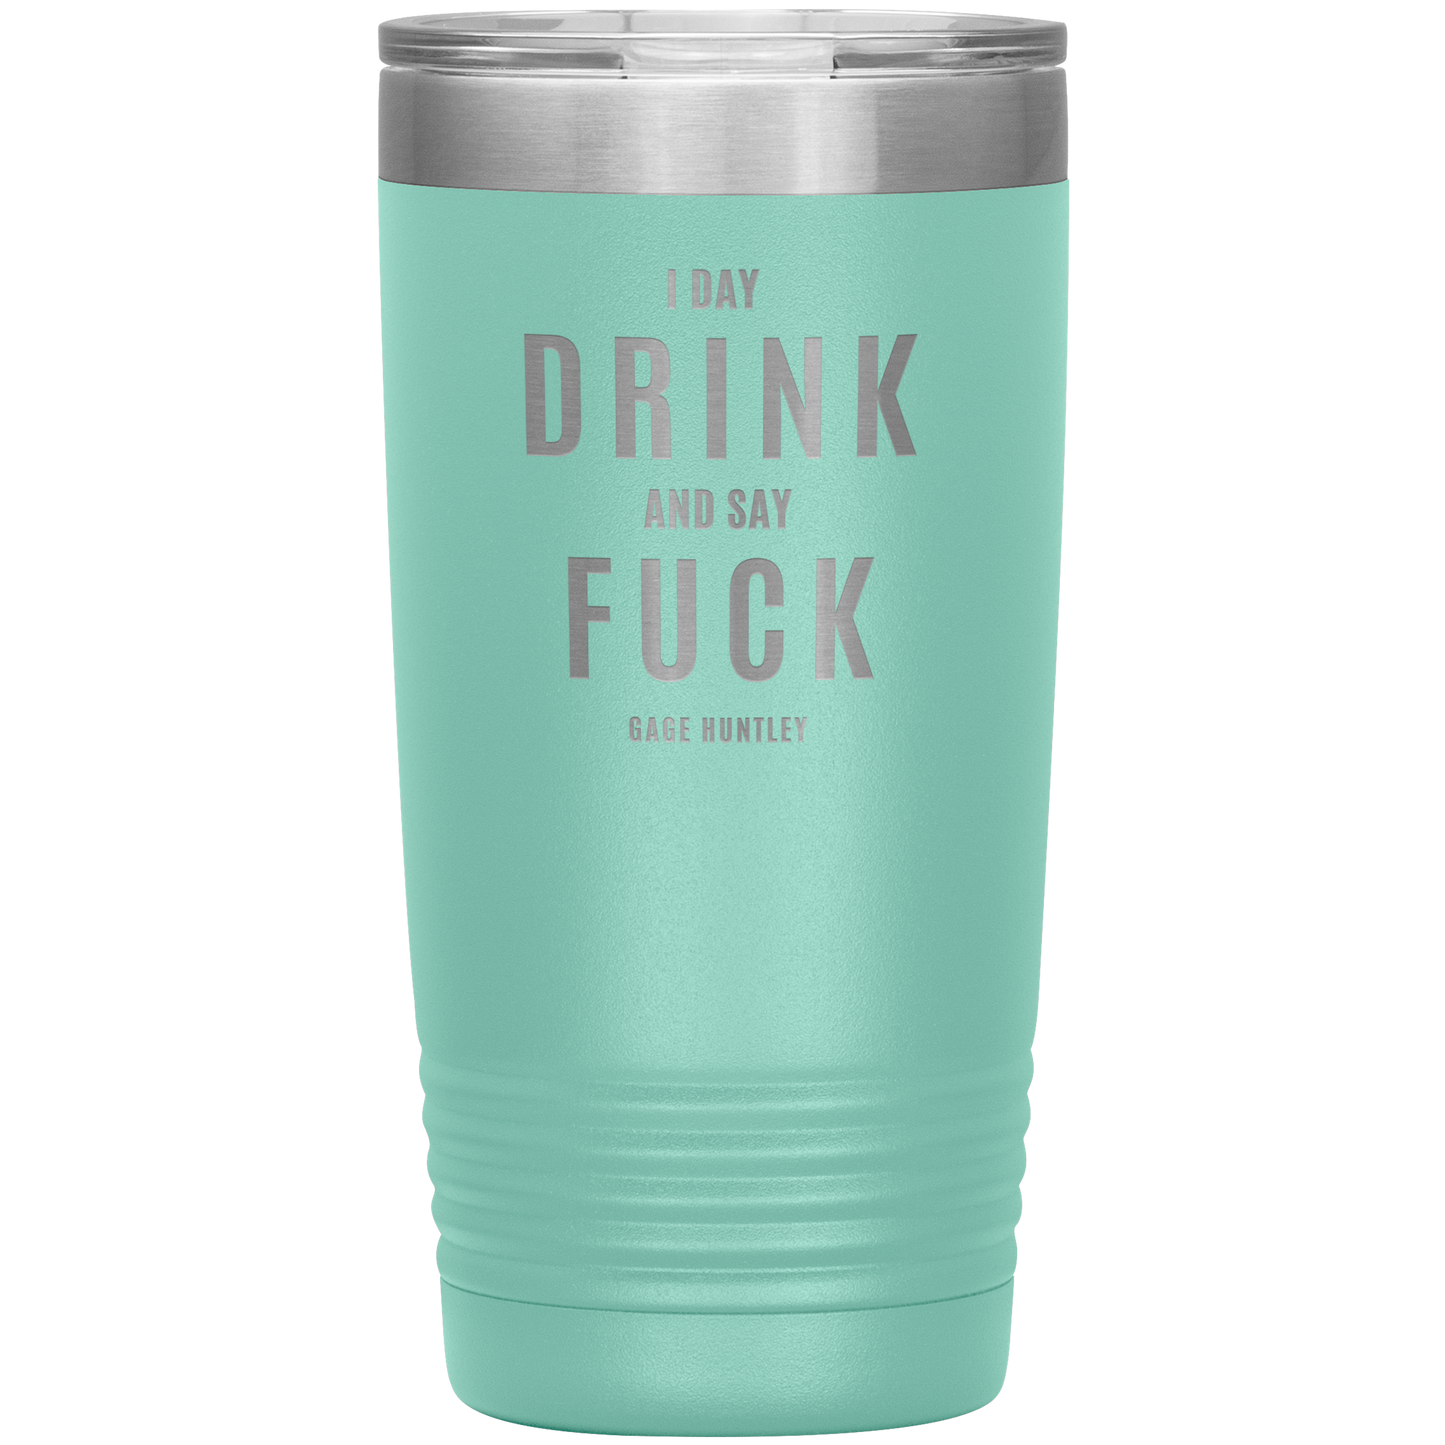 I Day Drink - 20 Ounce Tumbler